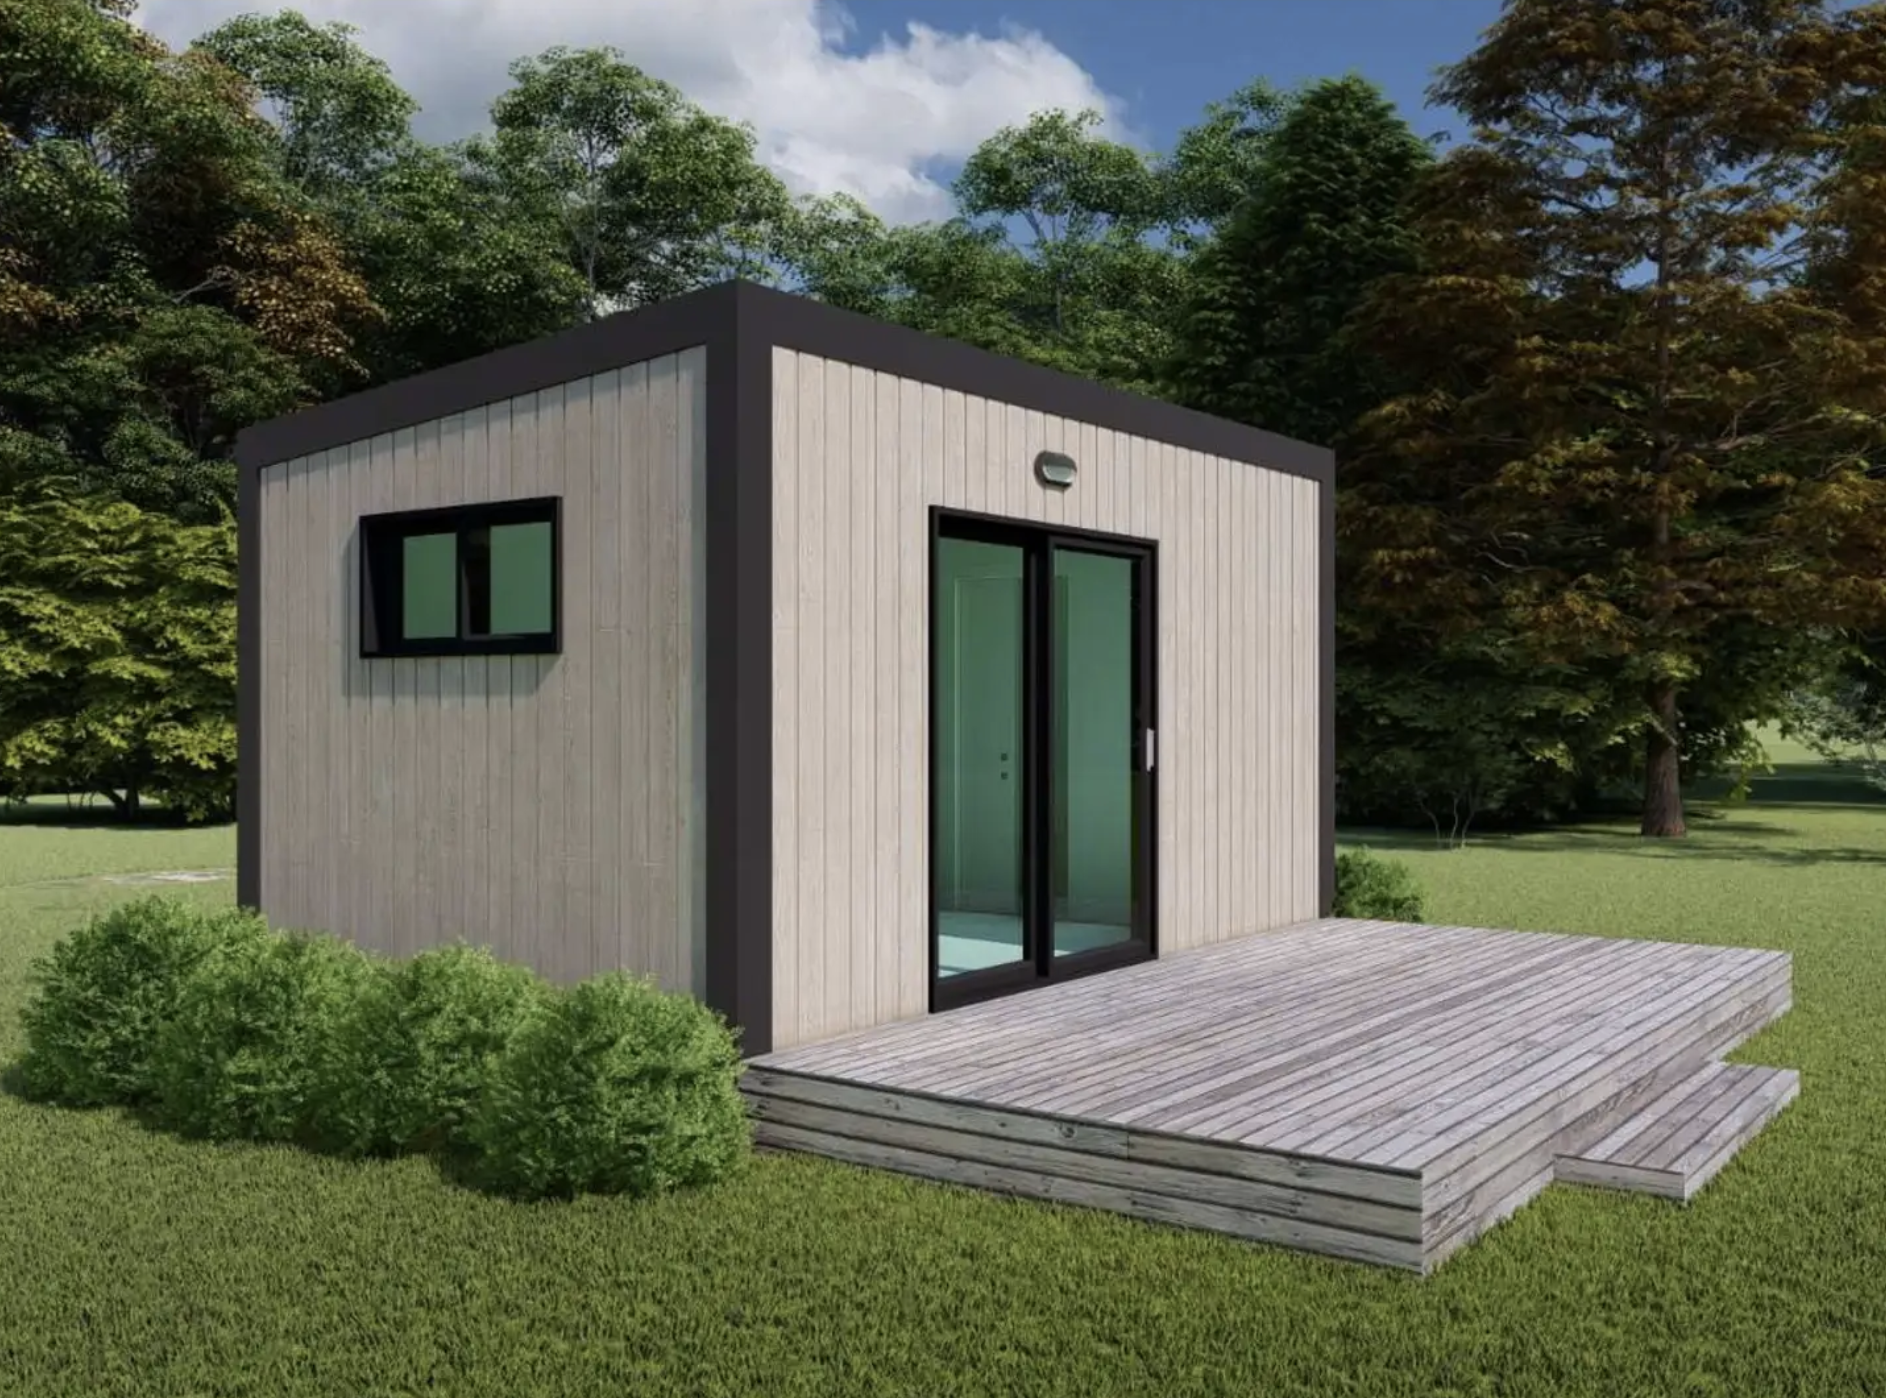 The WAL Construction team have an extensive portfolio of designs for you to choose the right cabin or sleepout to suit your needs. Check out more here